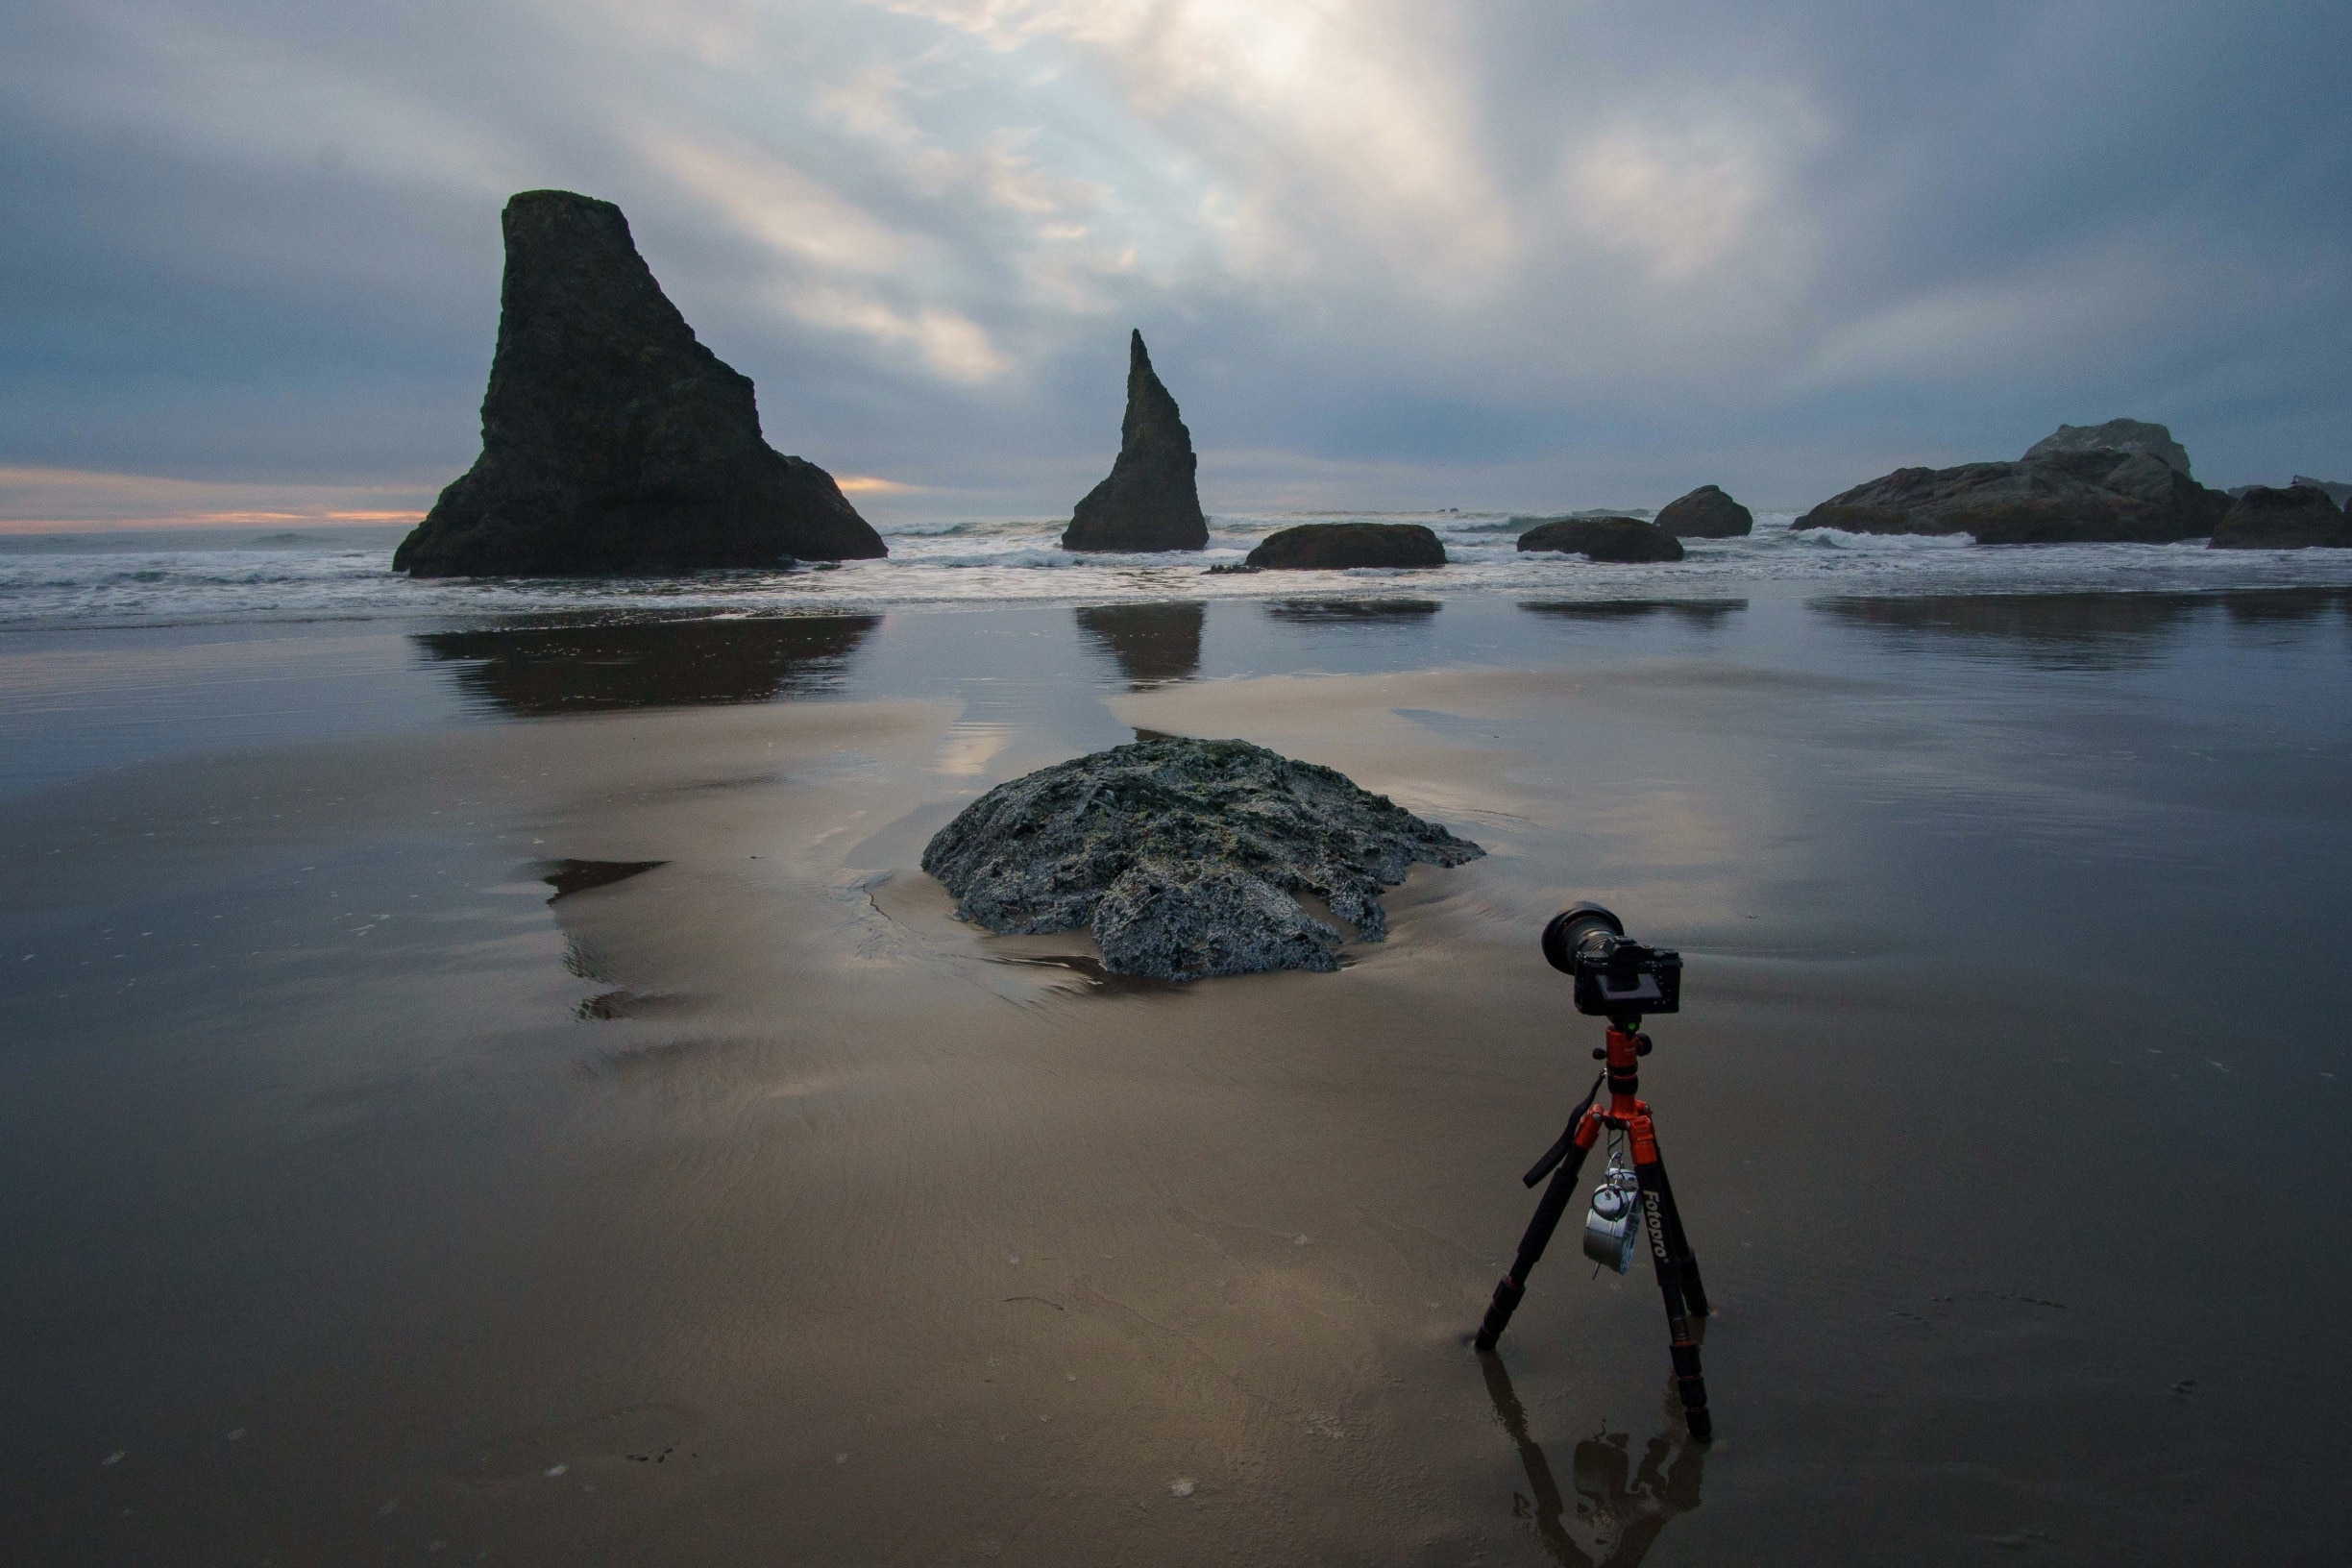 The Oregon coast offers some of the most magnificent landscapes in the world. Truly a bucket list destination.